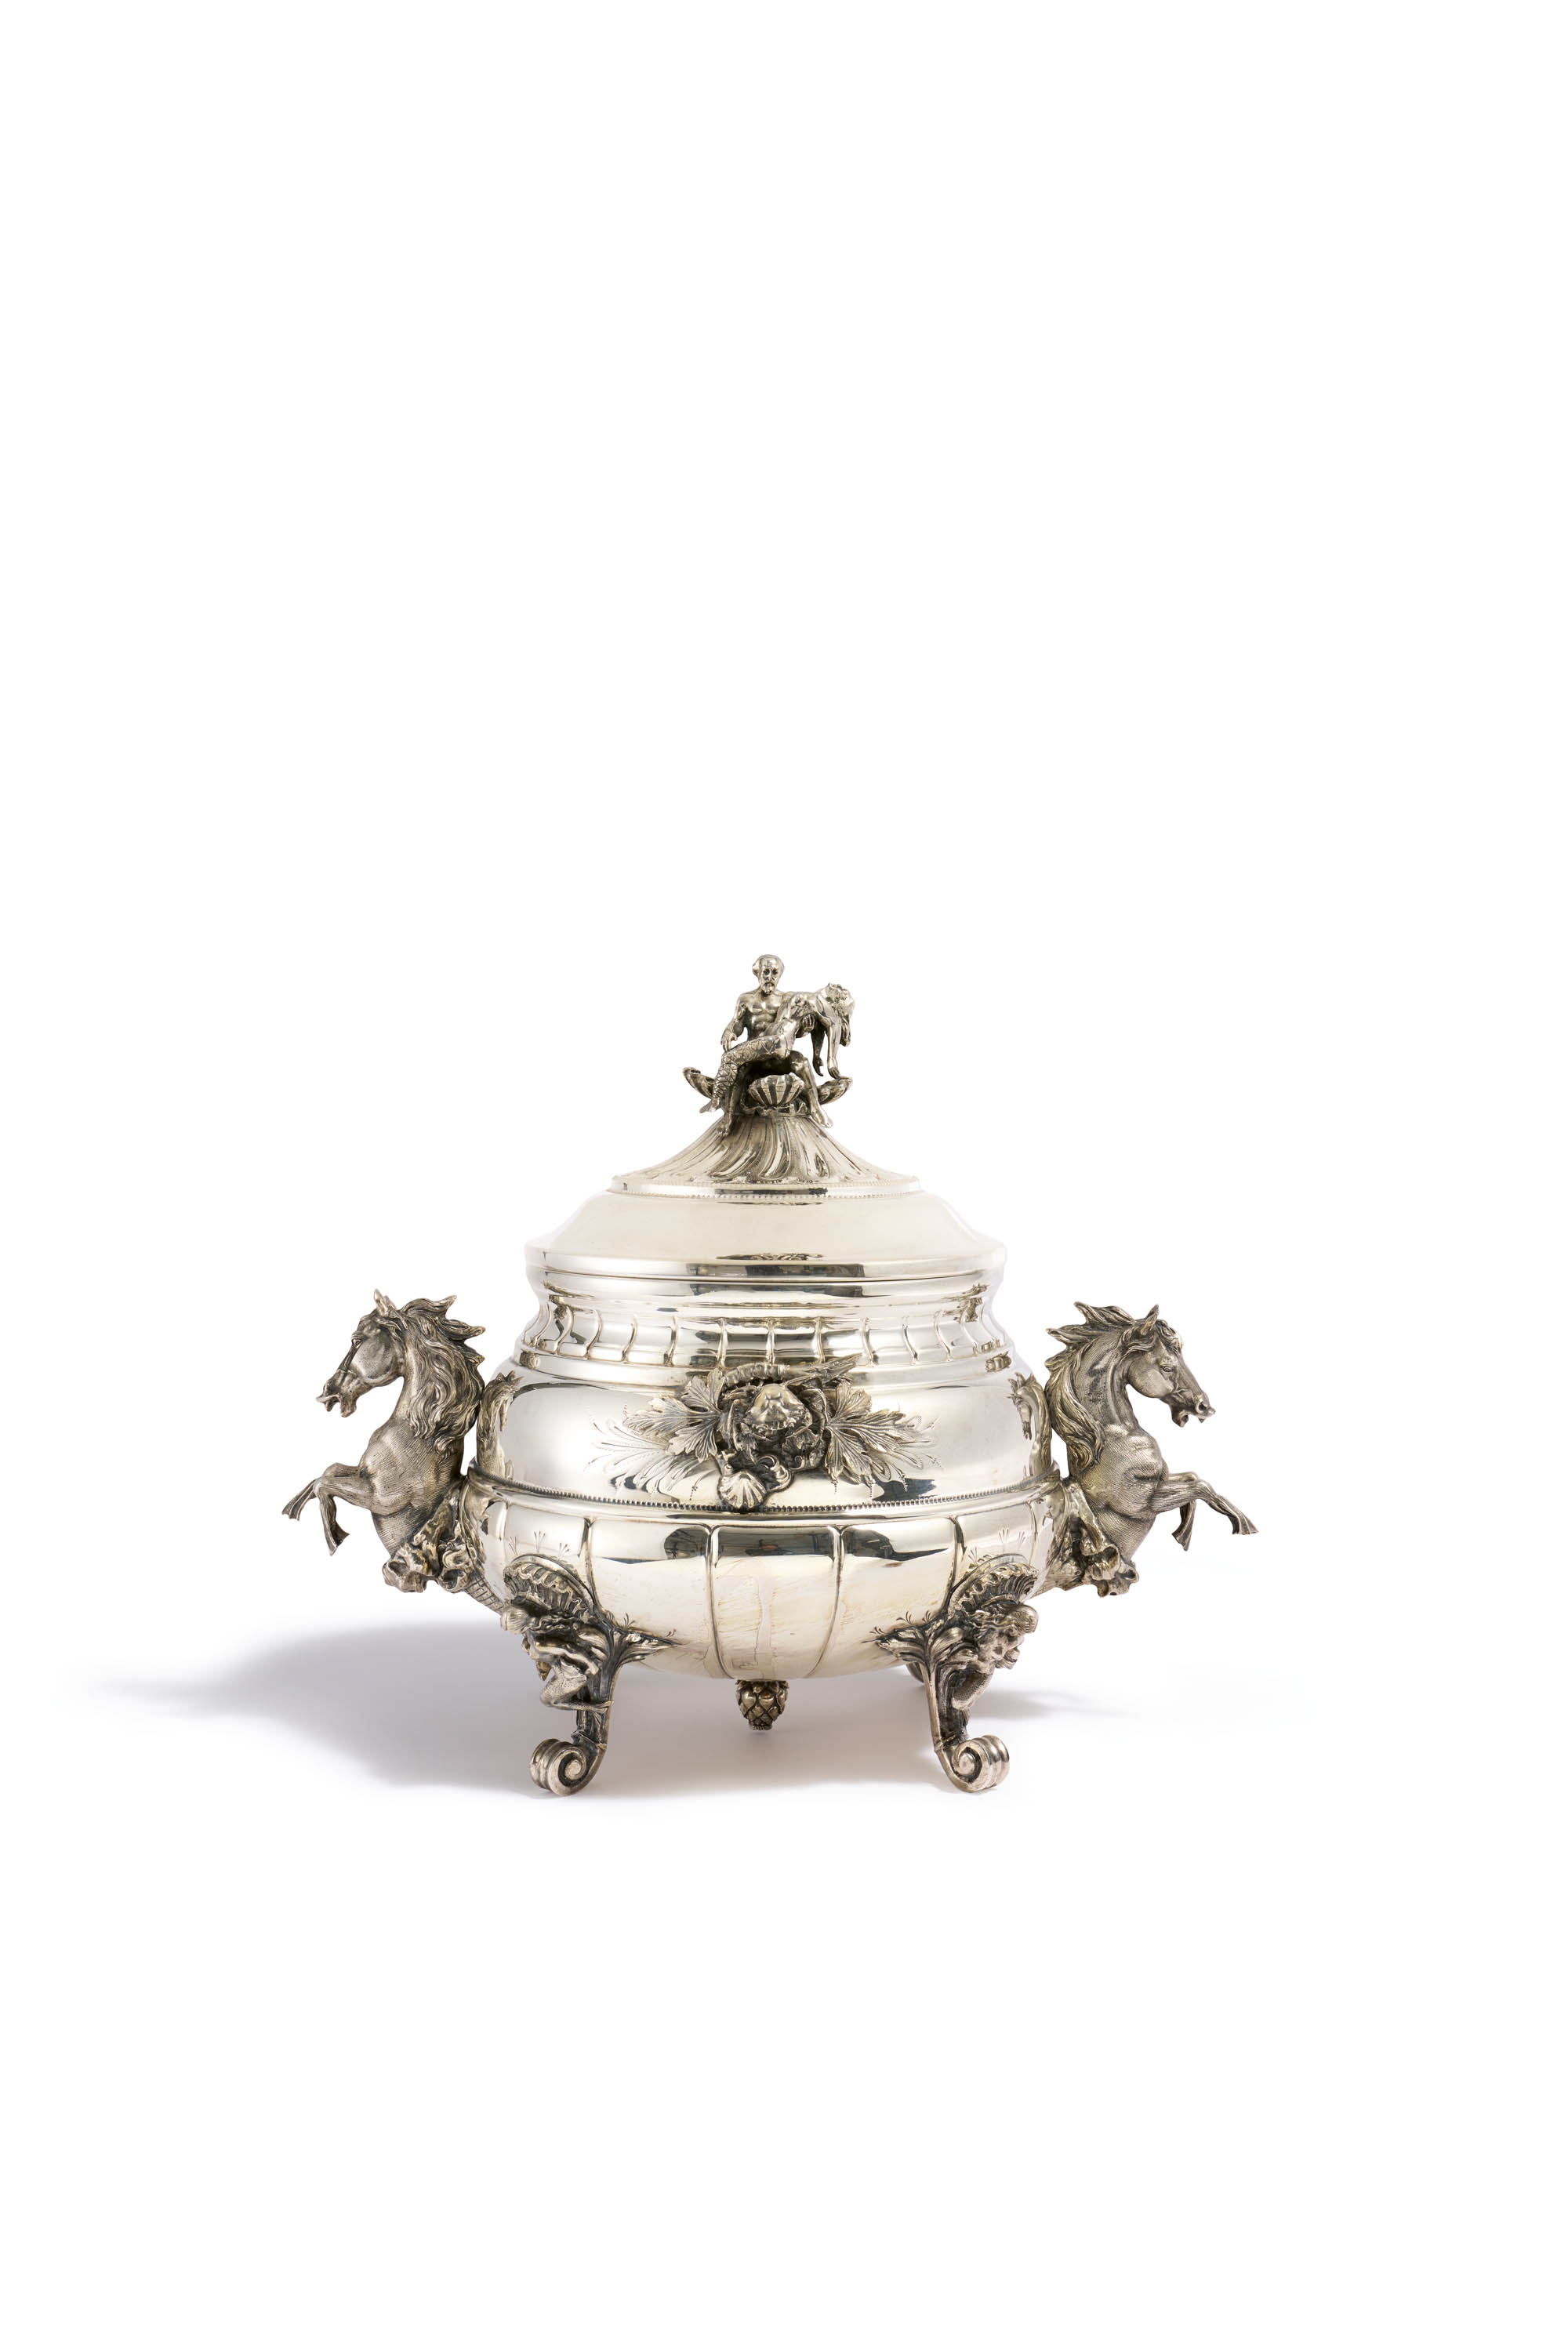 Magnificent tureen with hippocamps